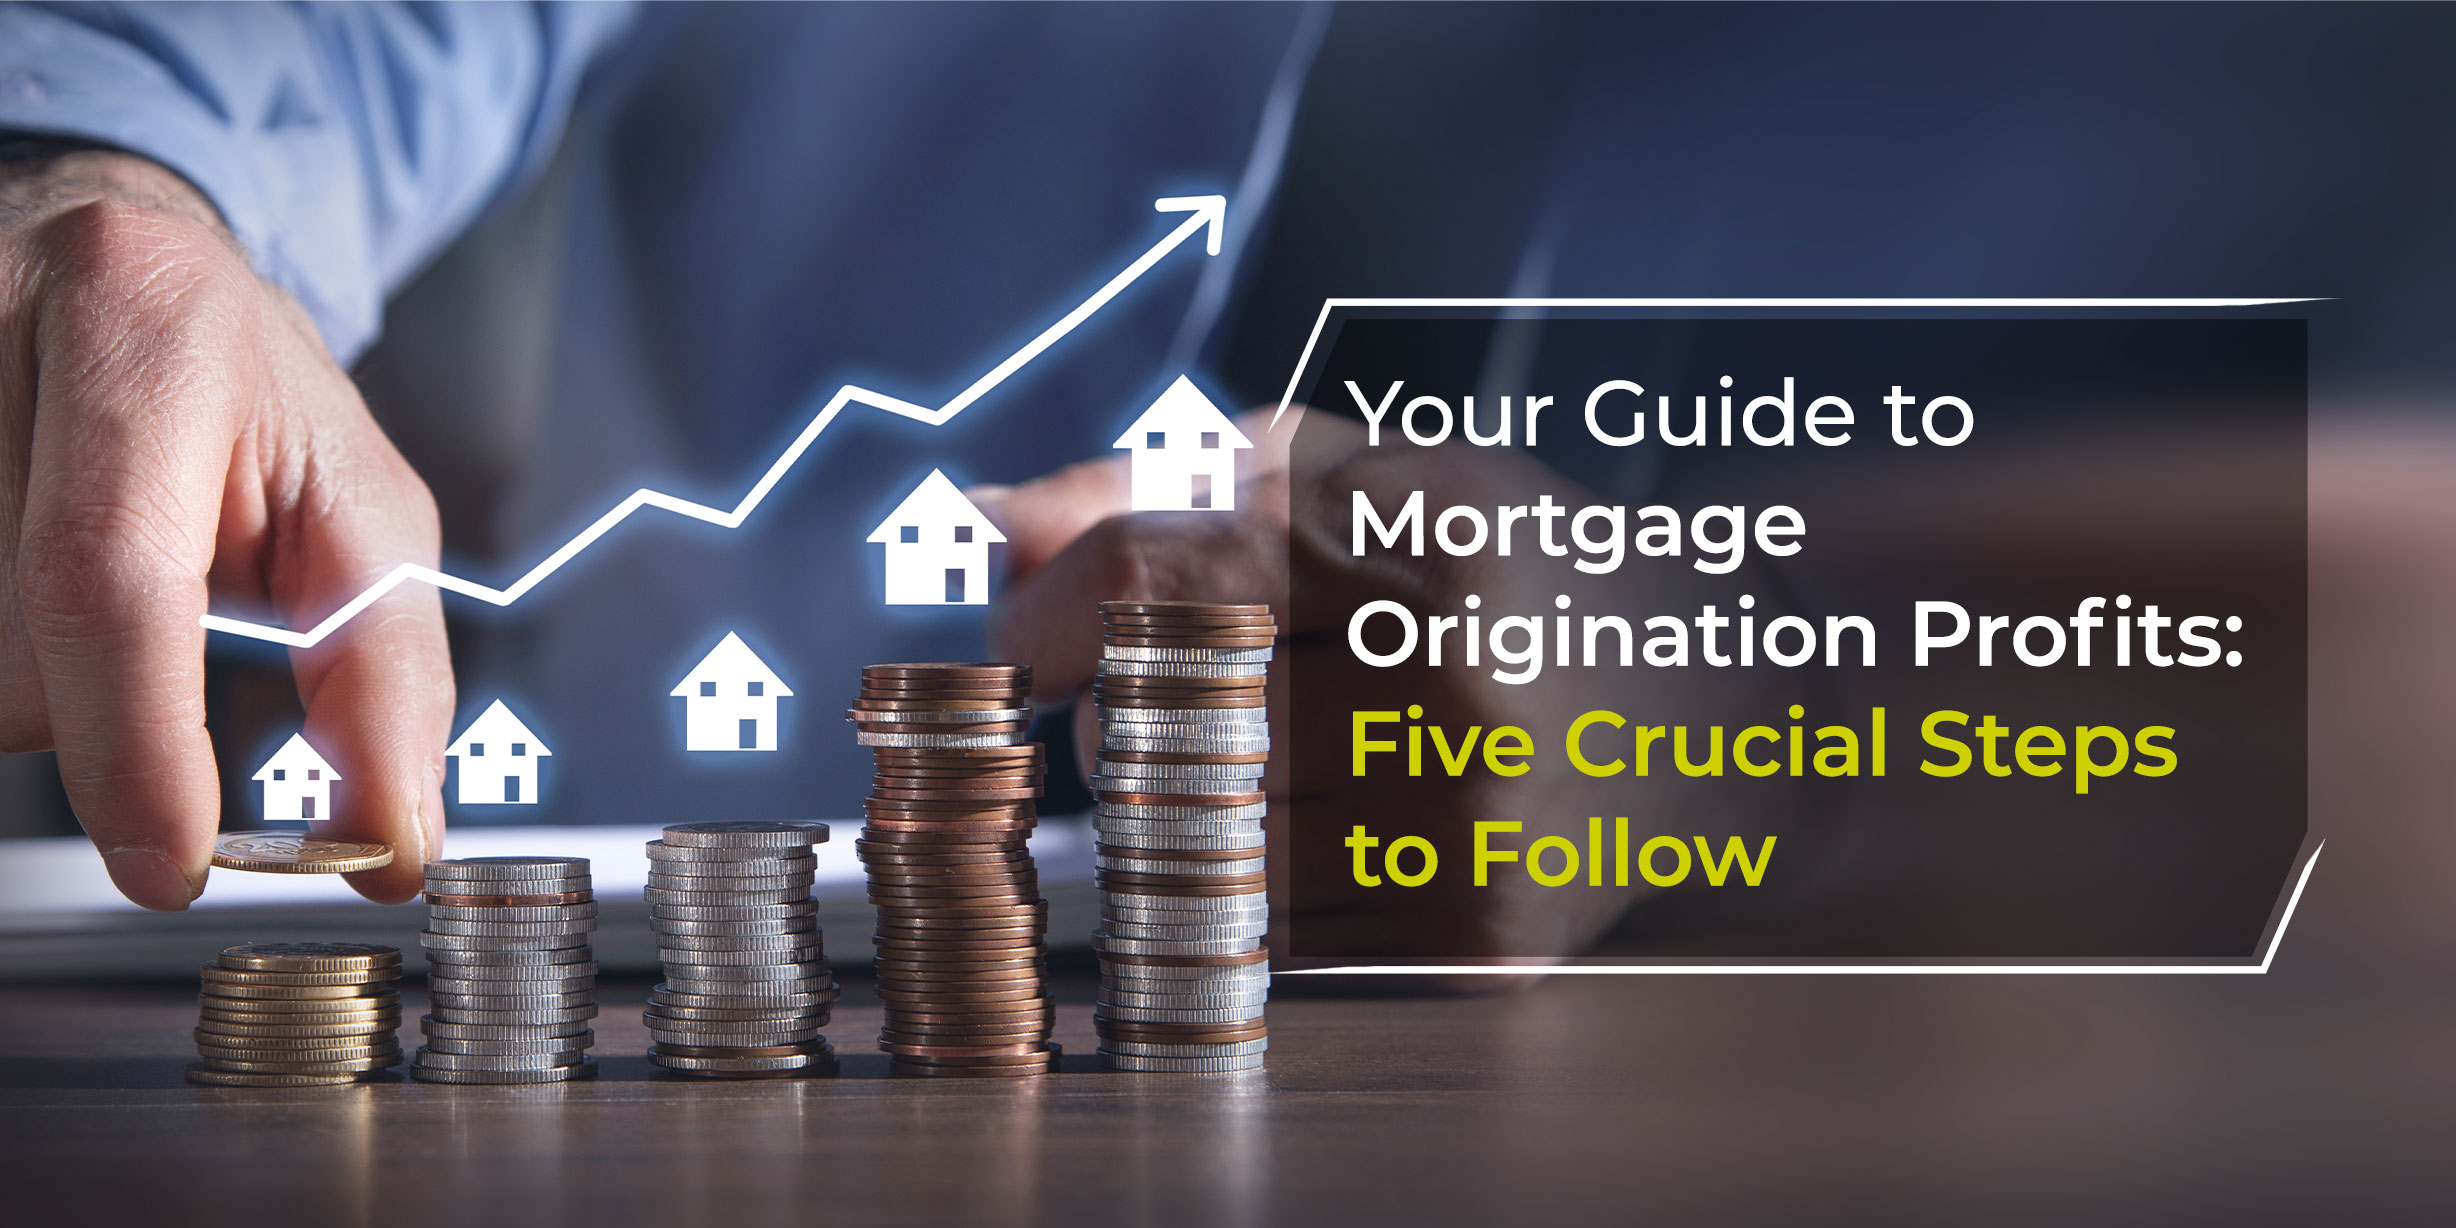 Your Guide to Mortgage Origination Profits: Five Crucial Steps to Follow